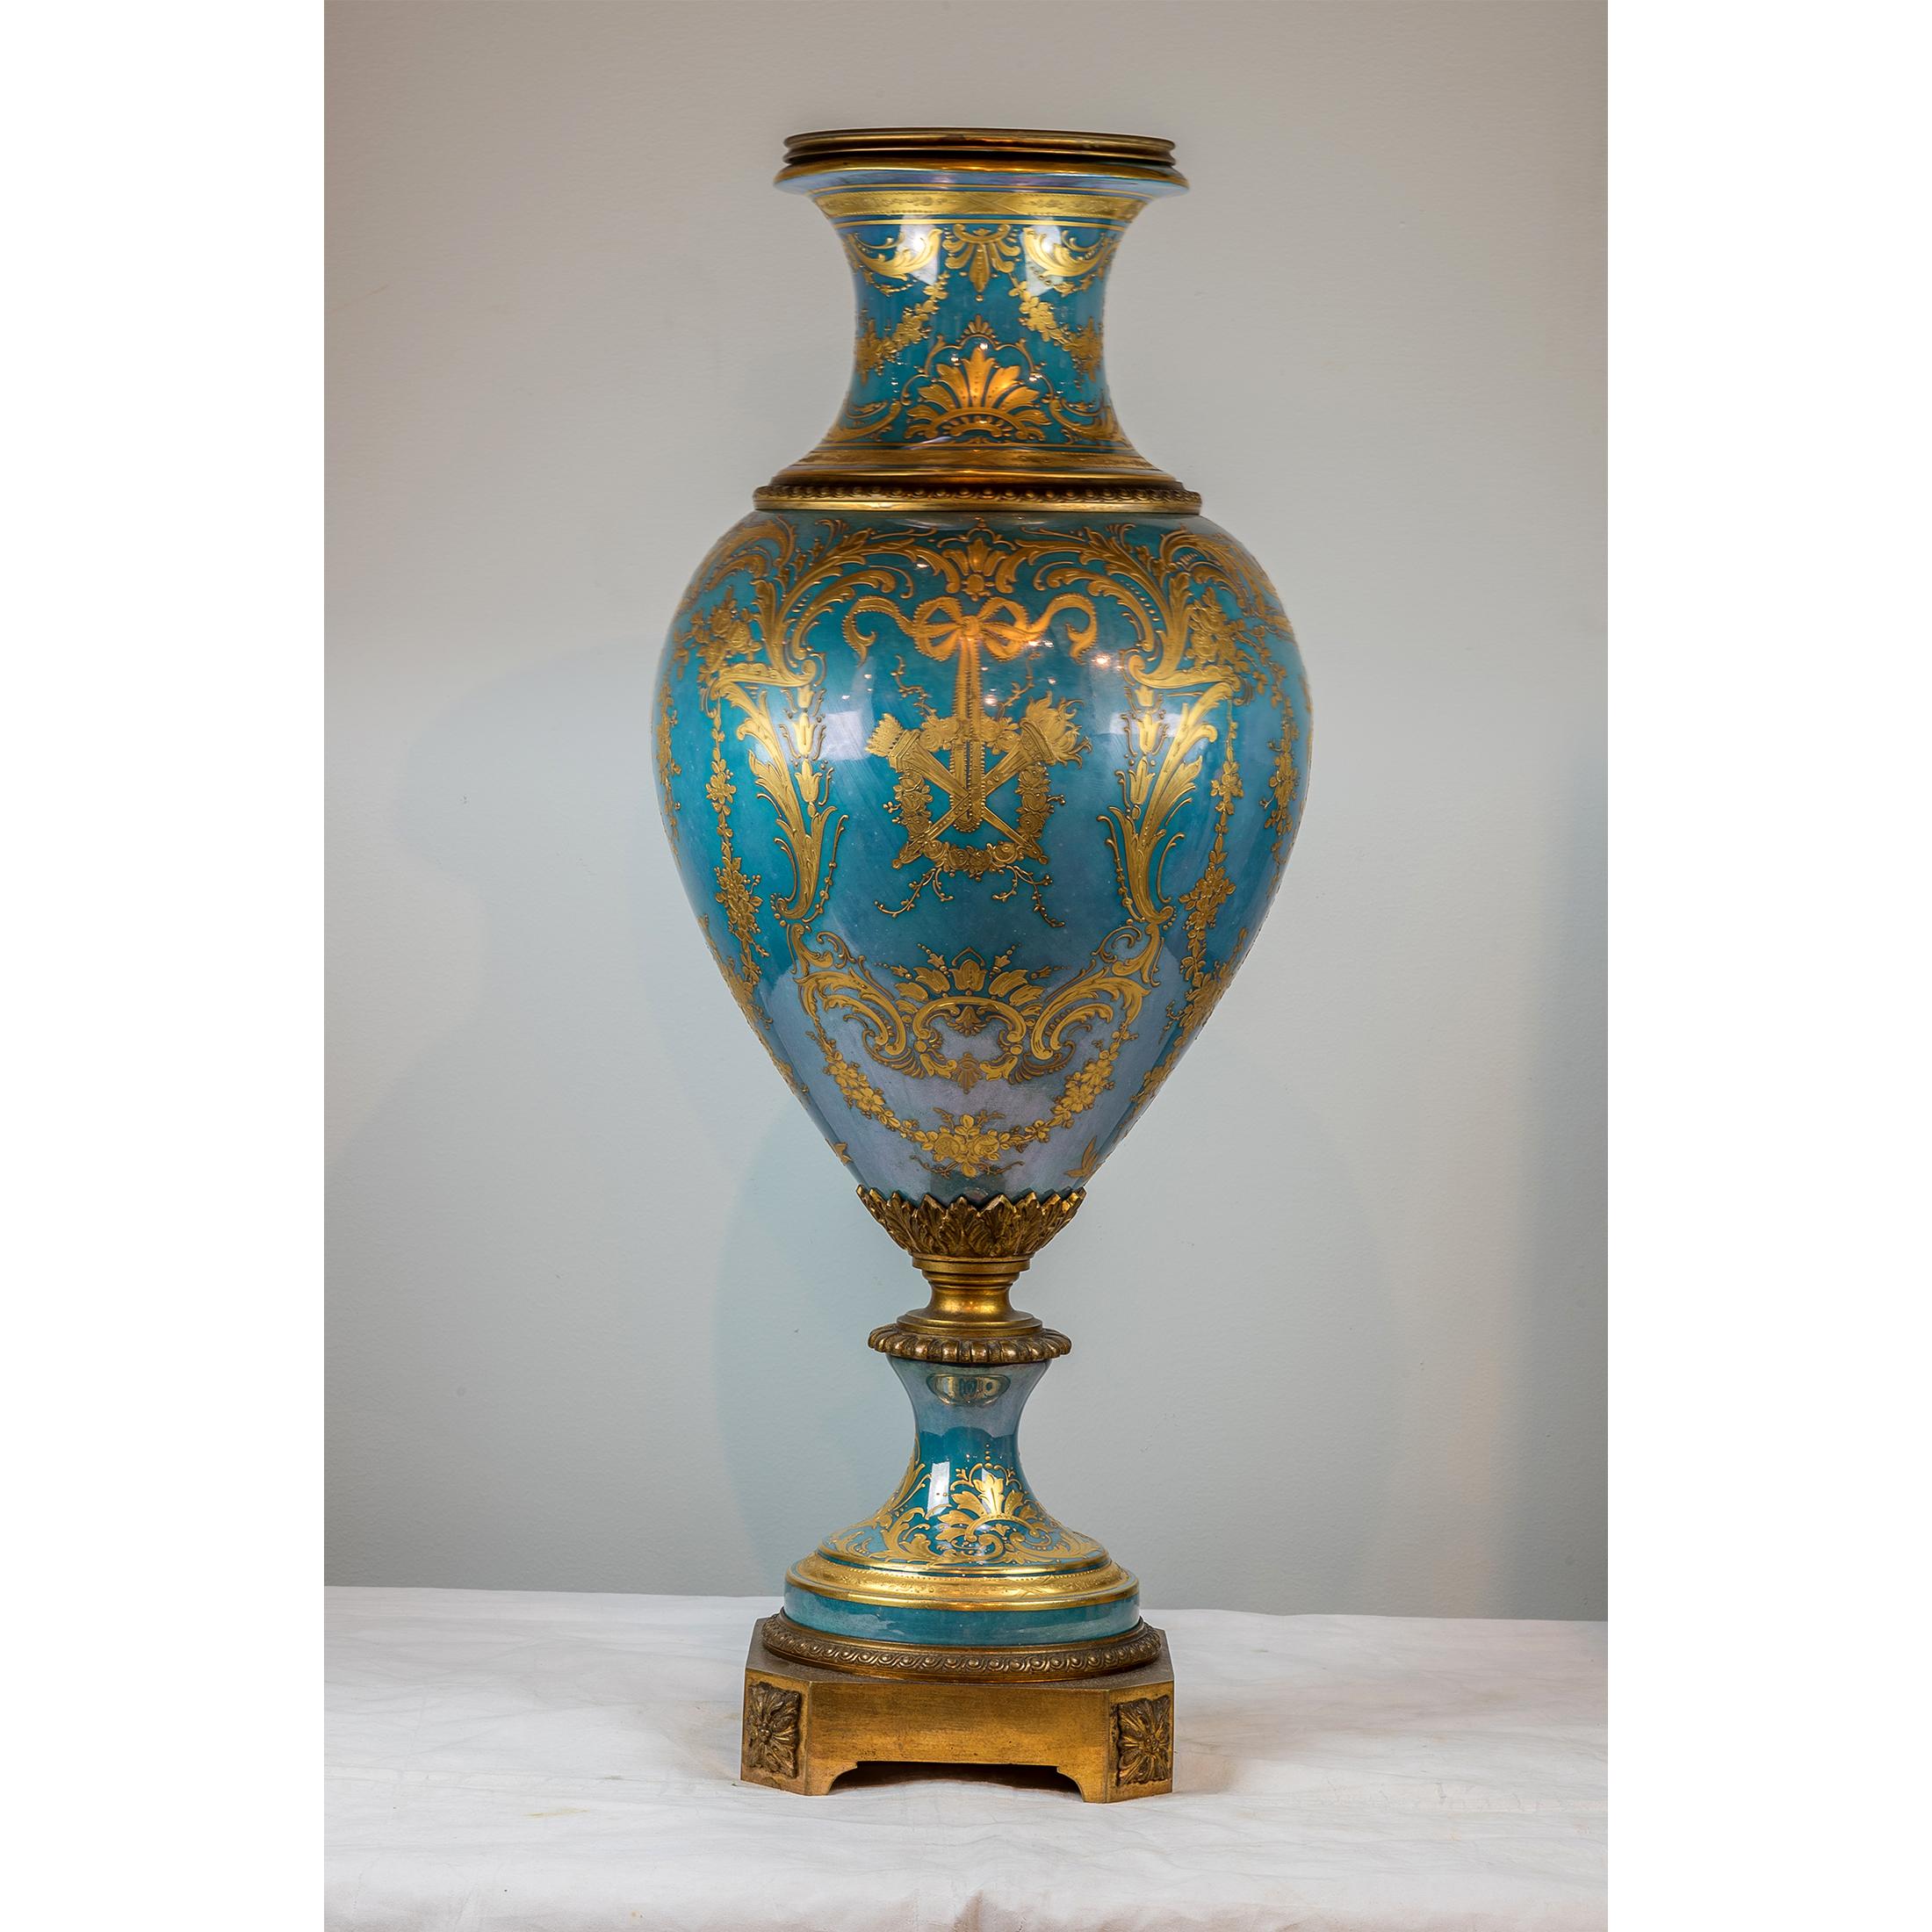 A fine quality gilt bronze mounted hand painted Royal Vienna Porcelain Portrait vase in Baluster Form, signed ‘Wagner.’

Origin: Austrian
Date: 19th century
Dimension: 25 1/2 in. x 10 in.